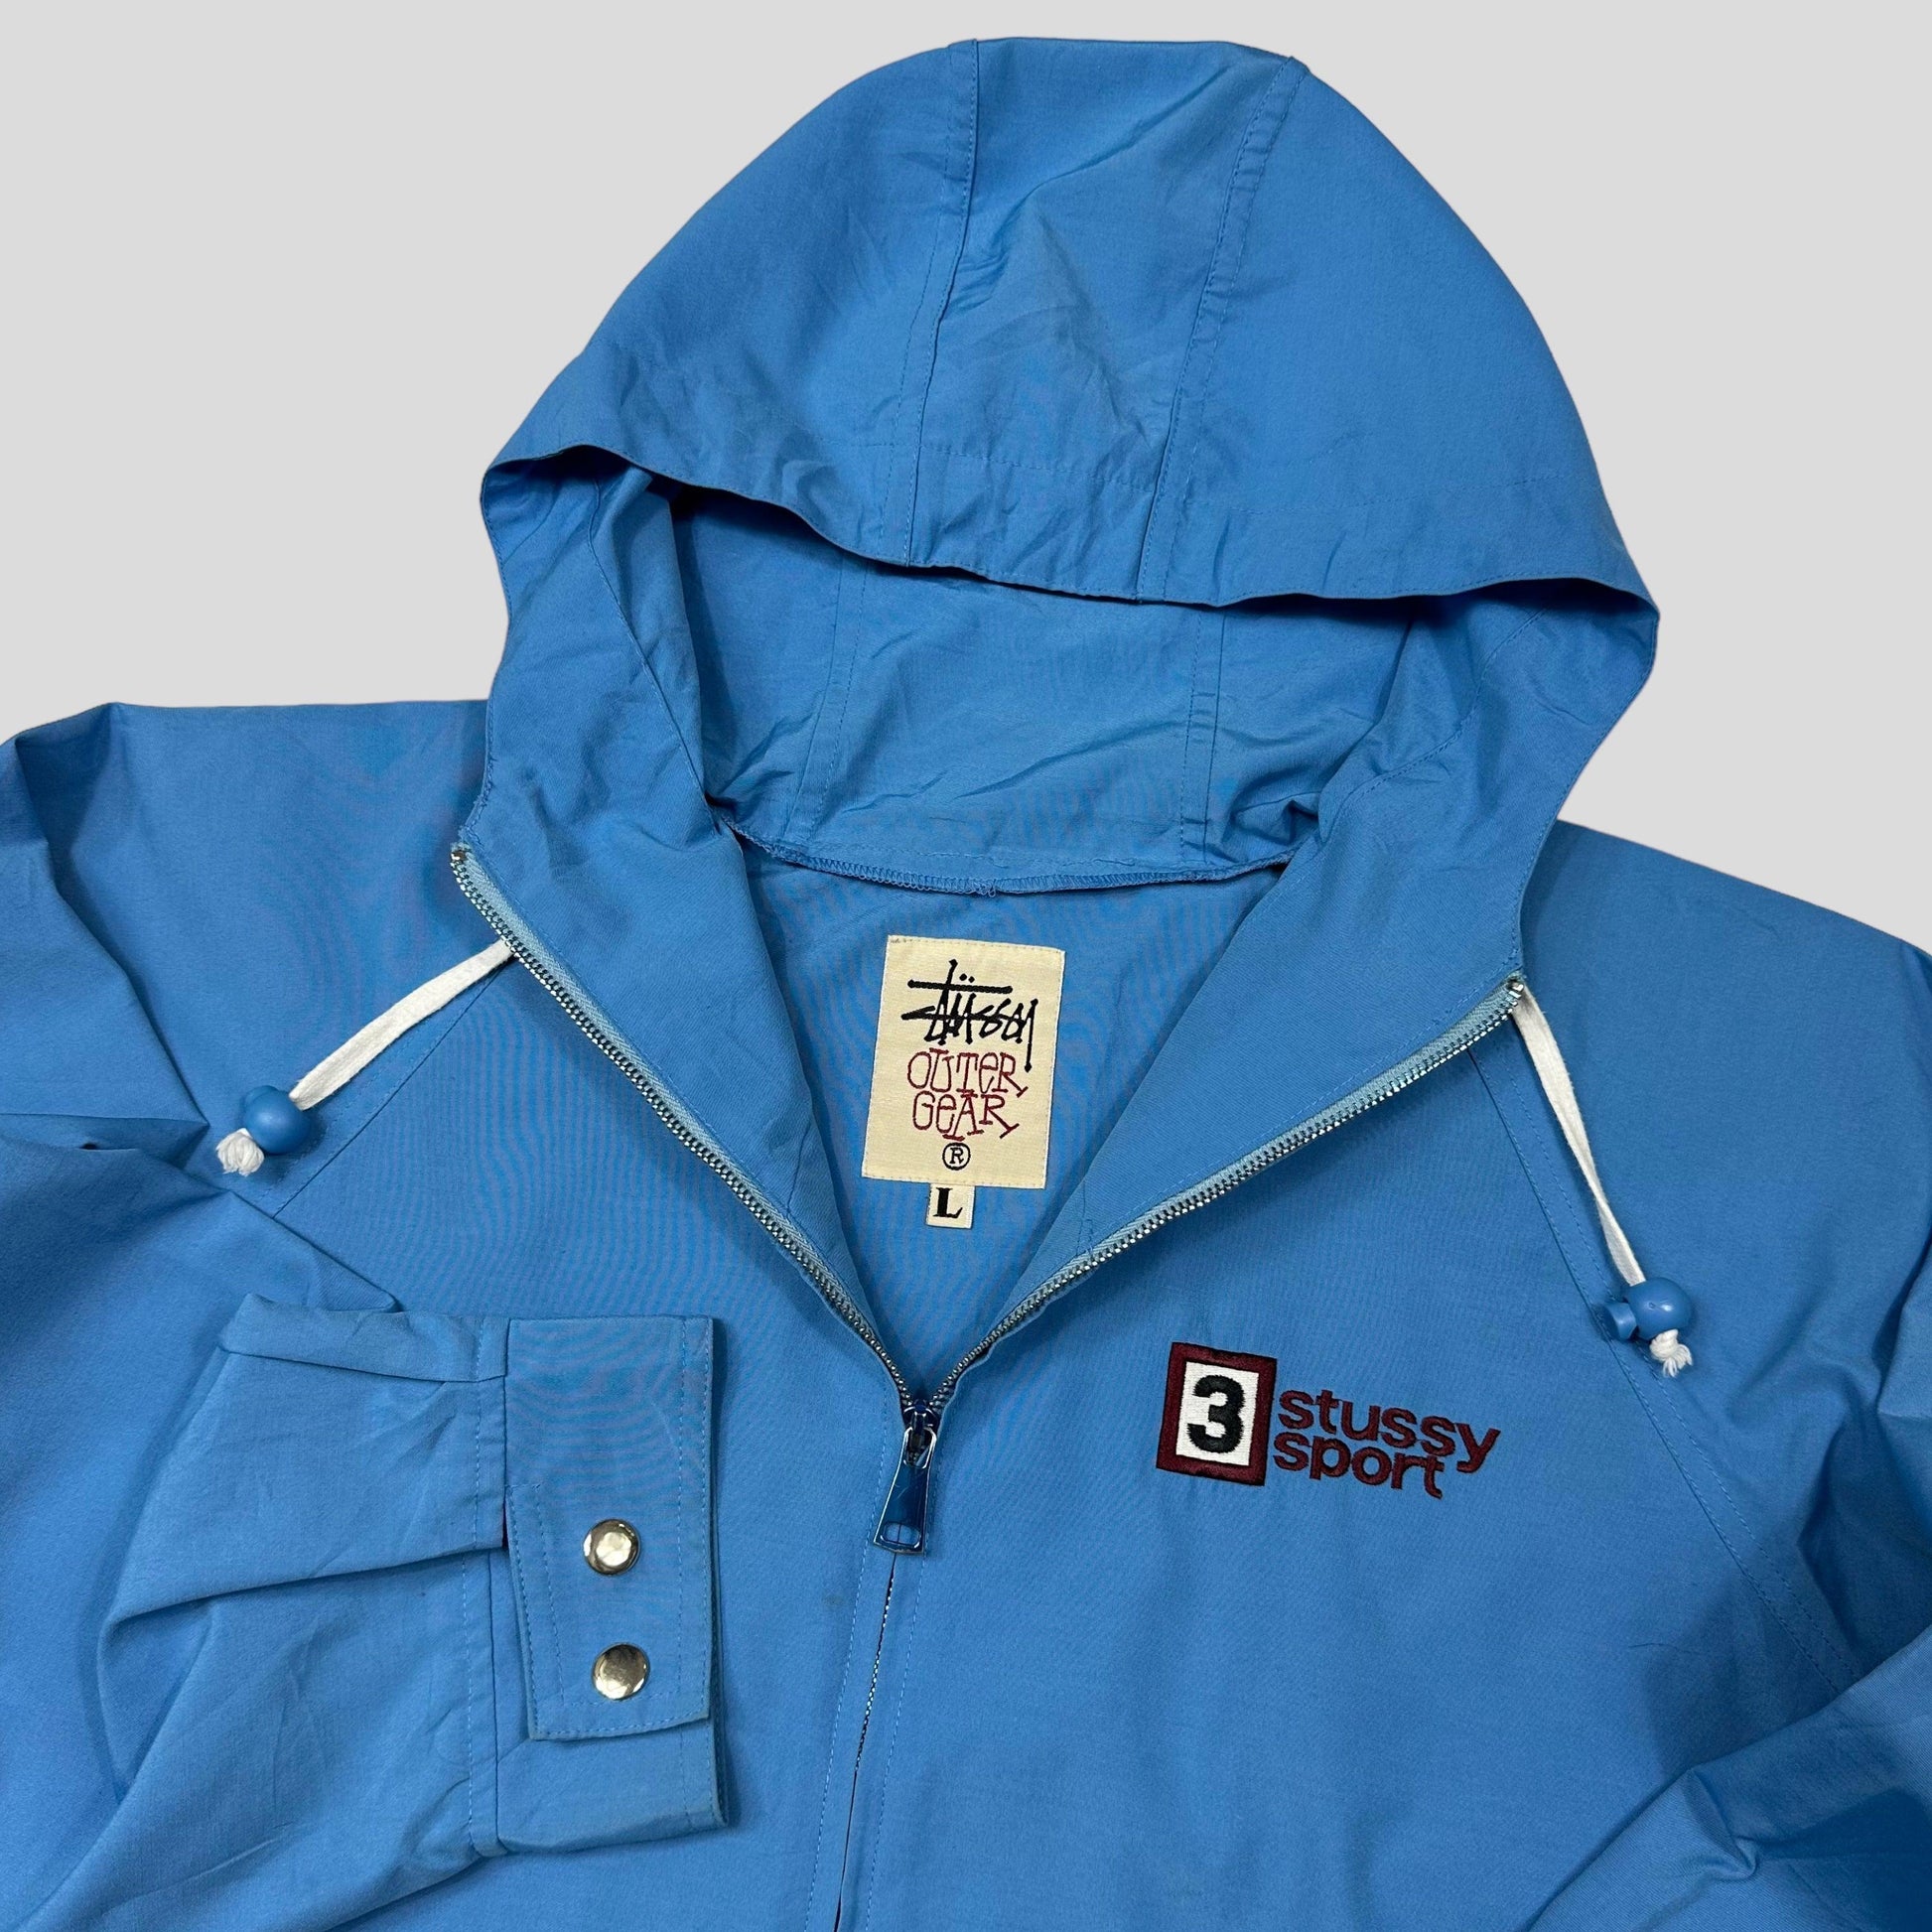 Stussy Sport 90’s Co-poly Sailing Jacket - XL - Known Source